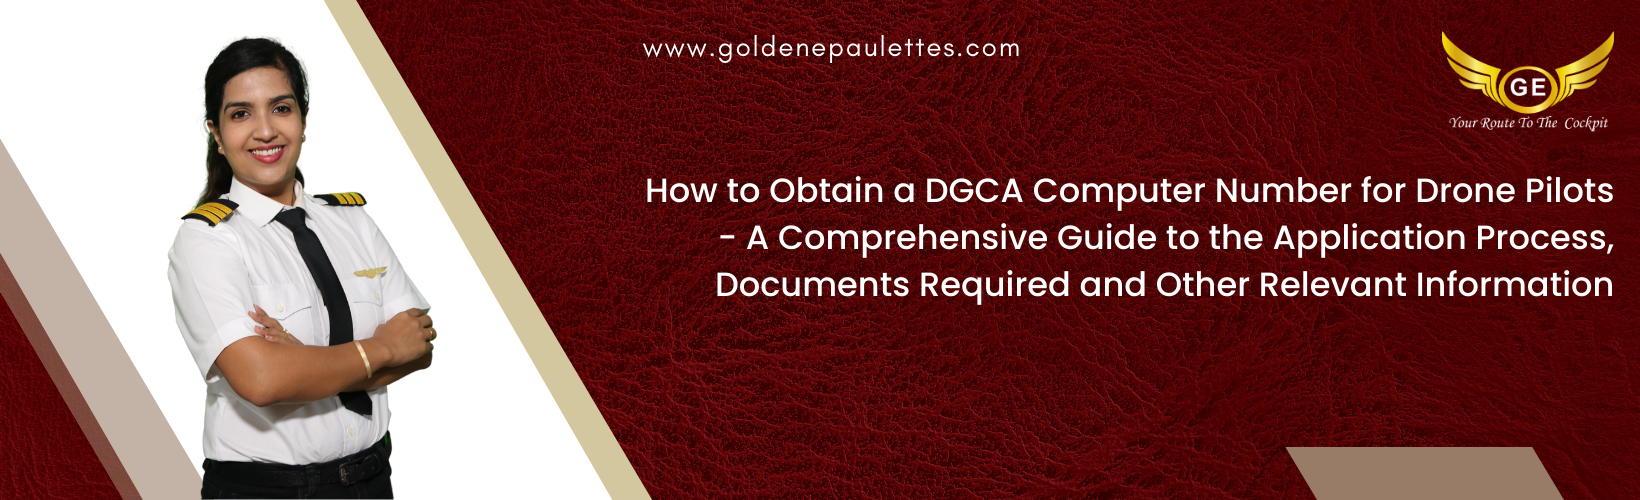 A Comprehensive Guide to Obtaining a DGCA Computer Number for Drone Pilots